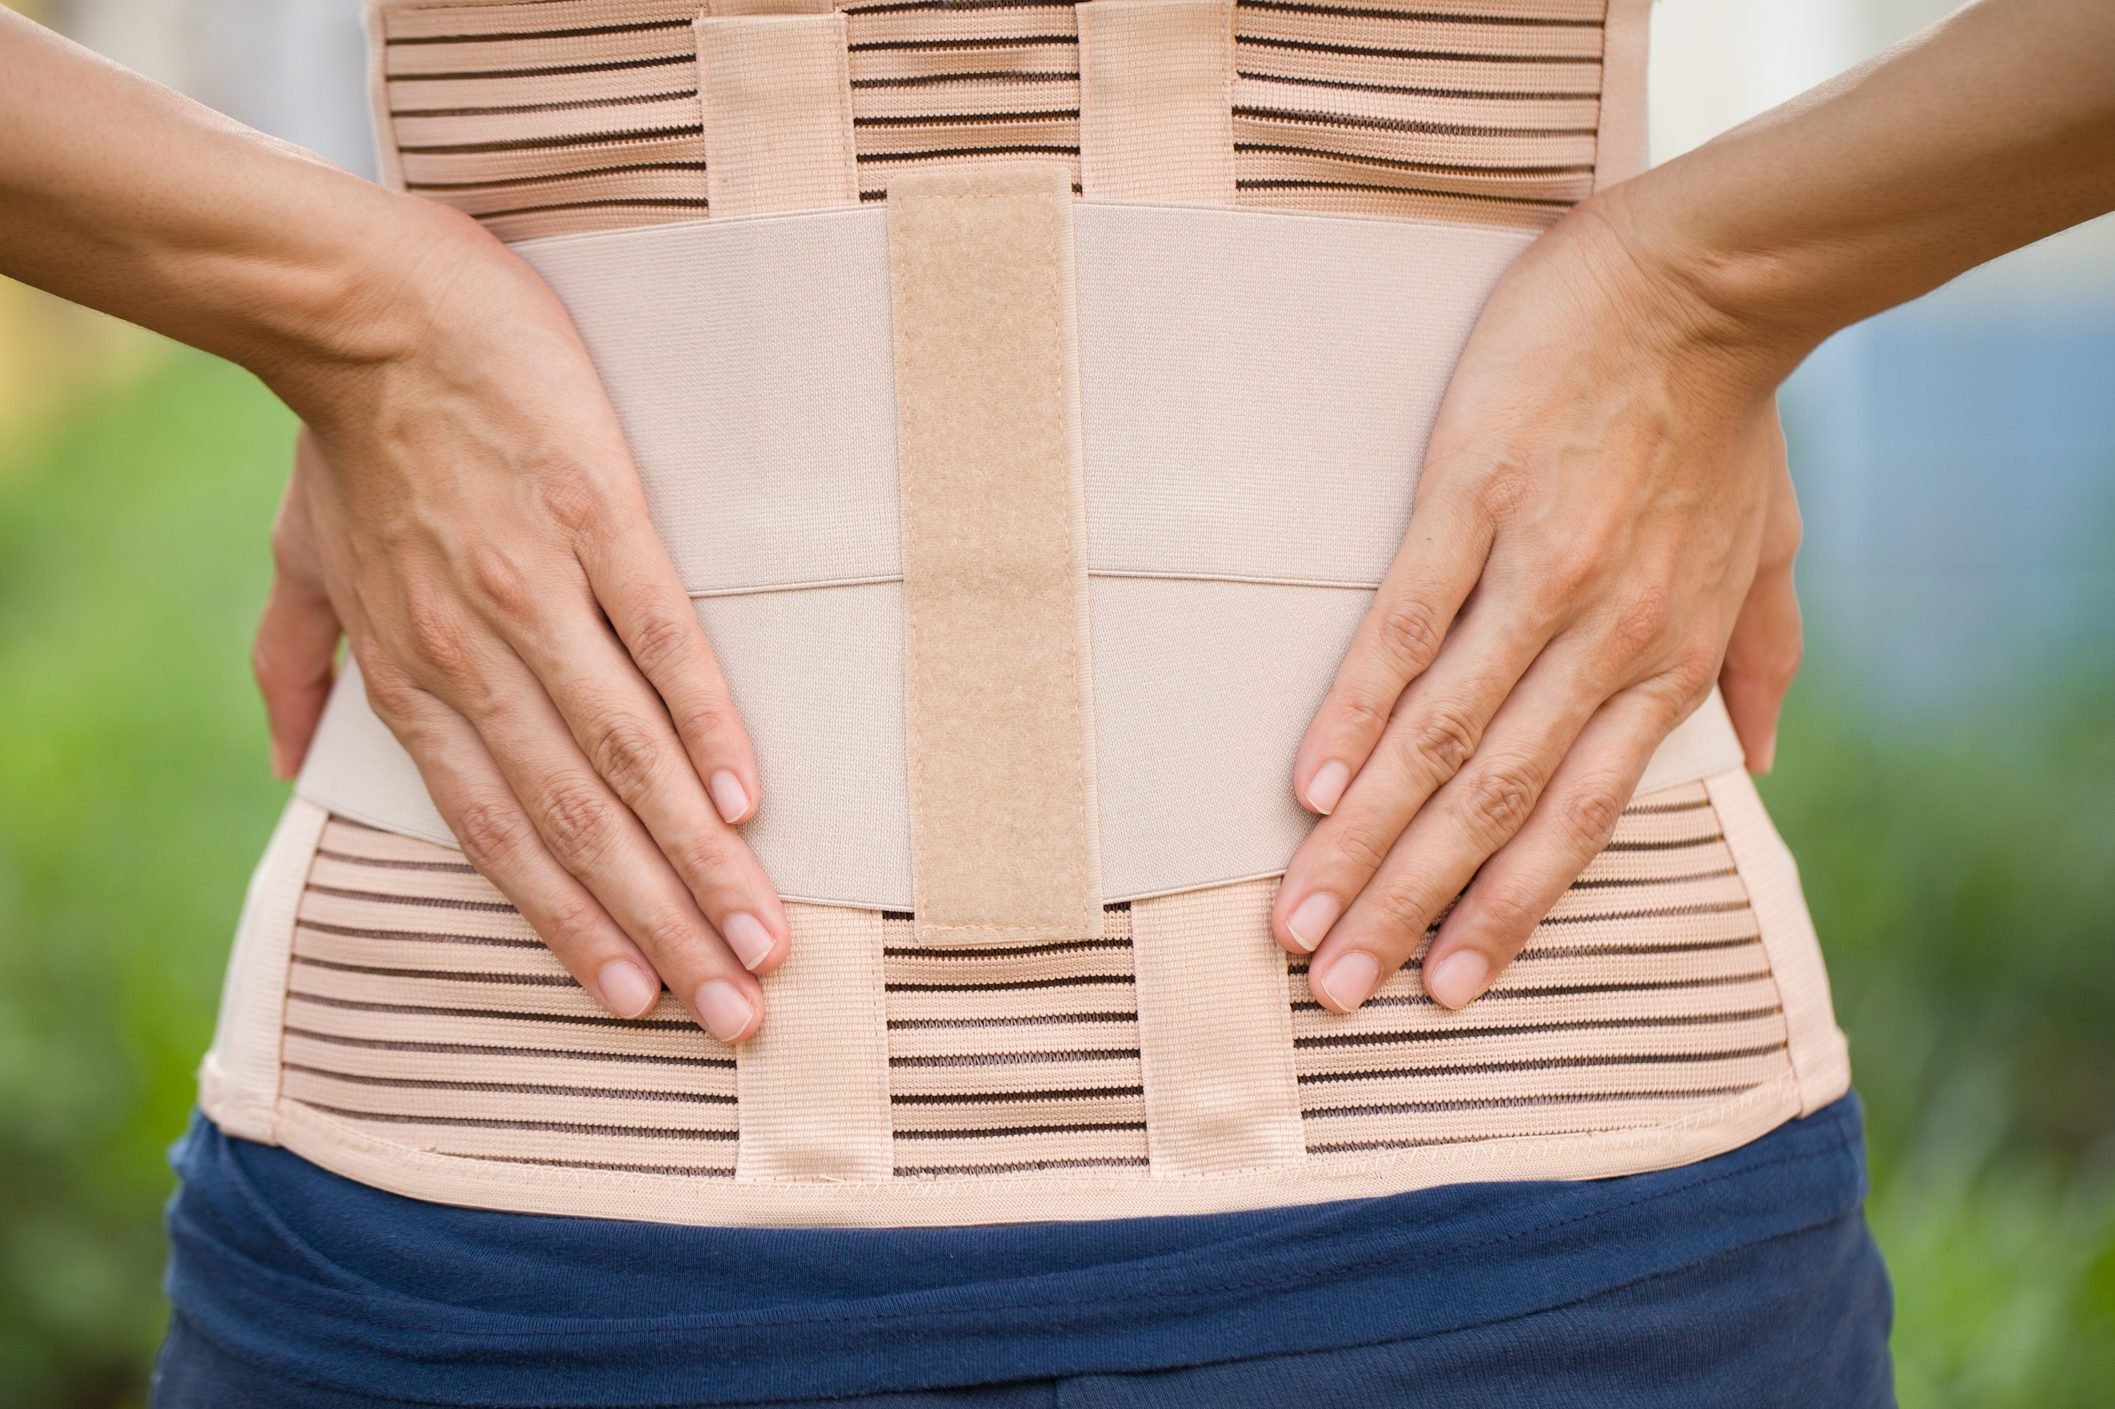 Back Brace for Lower Back Pain: What You Need to Know